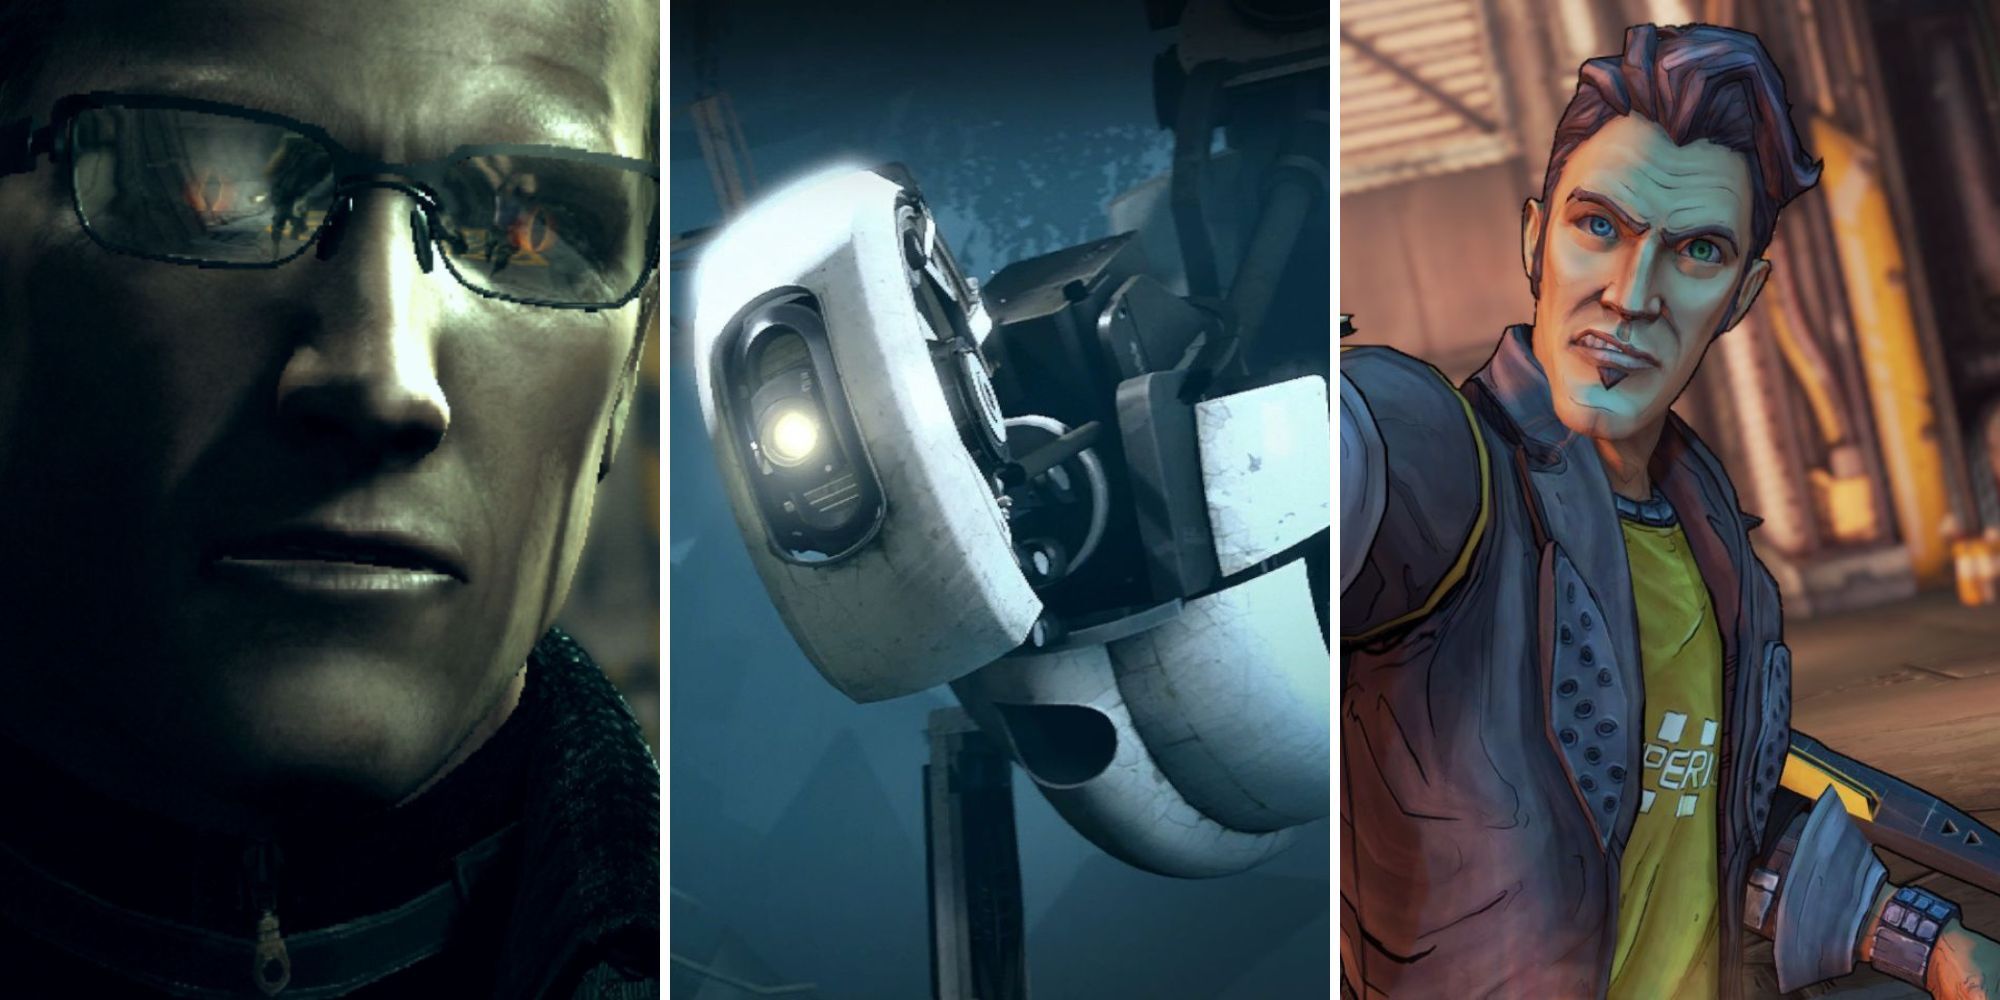 A grid showing three mean characters from the games Resident Evil 5, Portal 2, and Borderlands: The Pre-Sequel